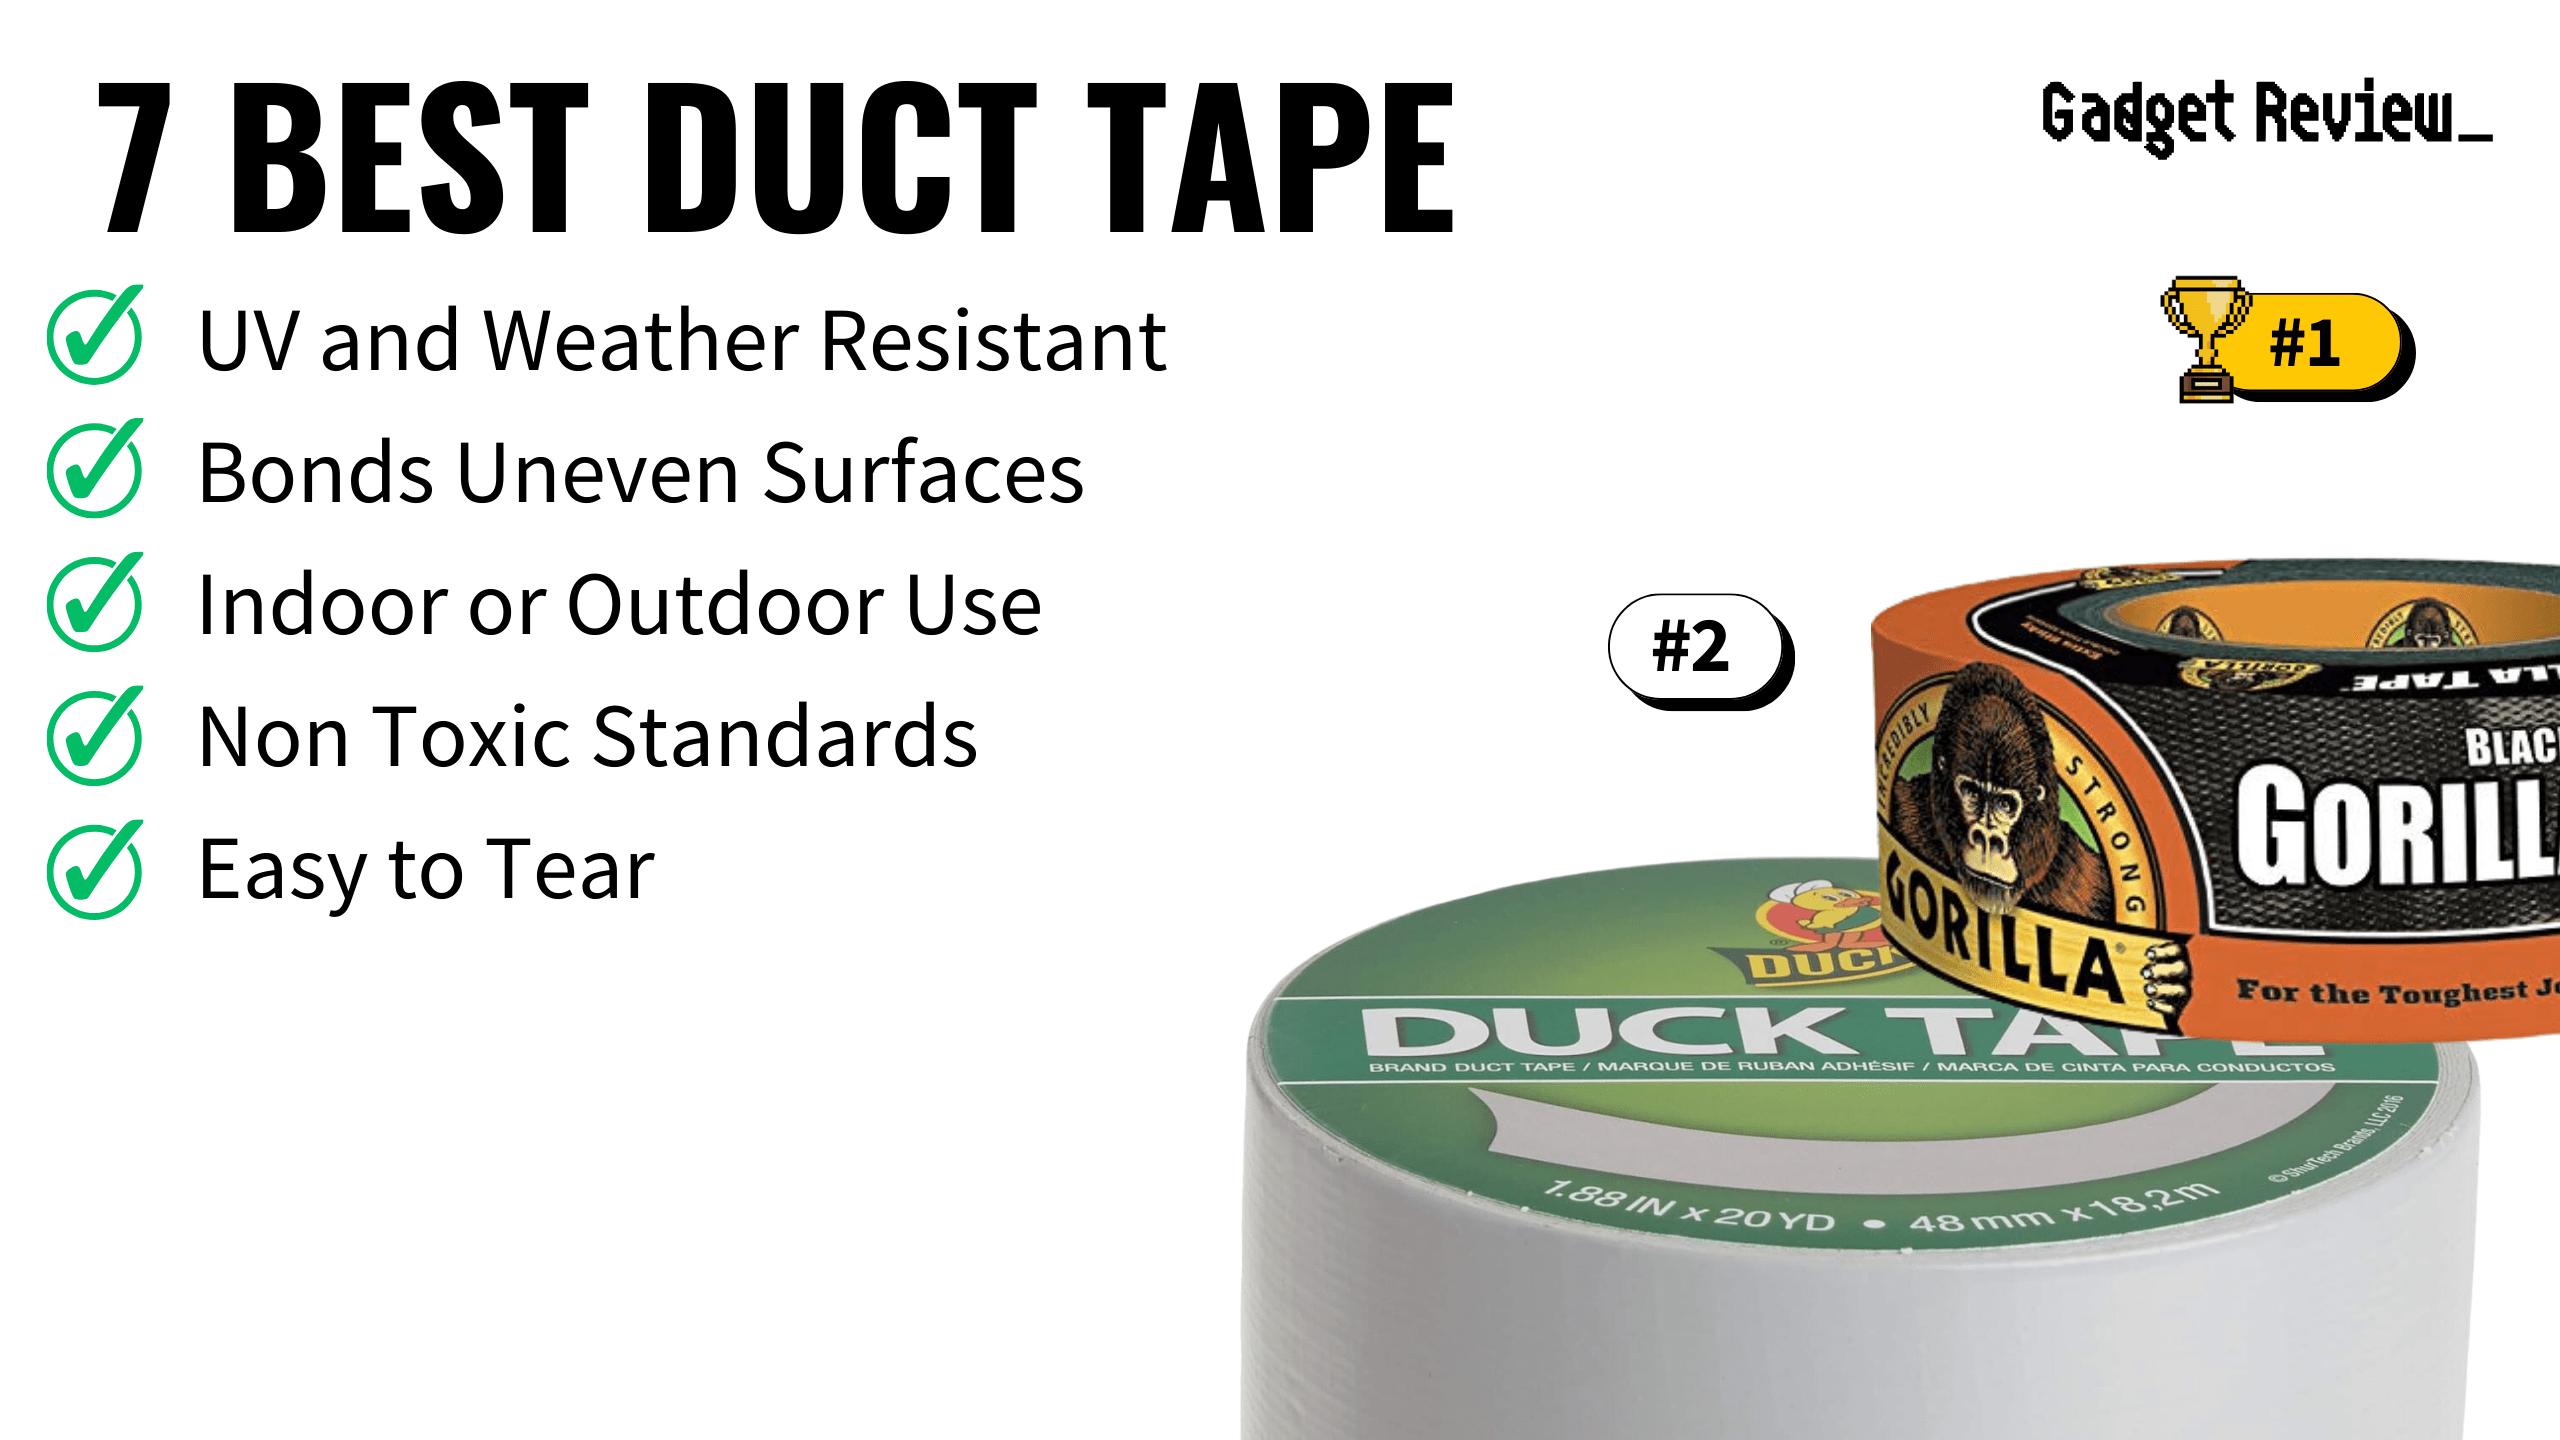 best duct tape featured image that shows the top three best tool models